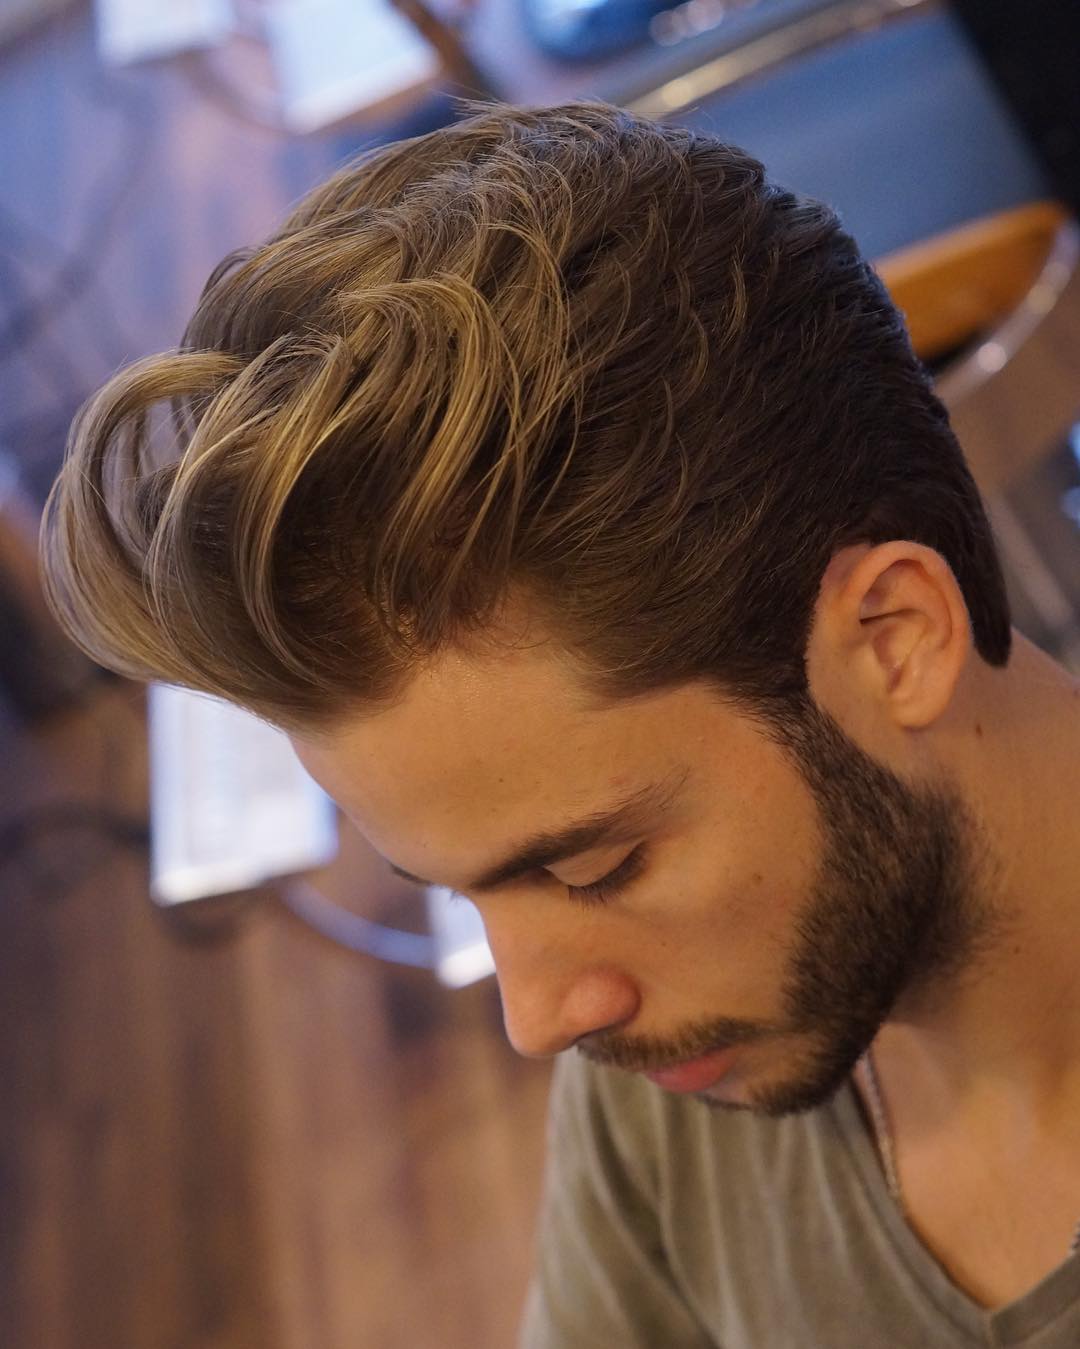 40 Spectacular Quiff Hairstyle Ideas - The Most Iconic Men's Haircut